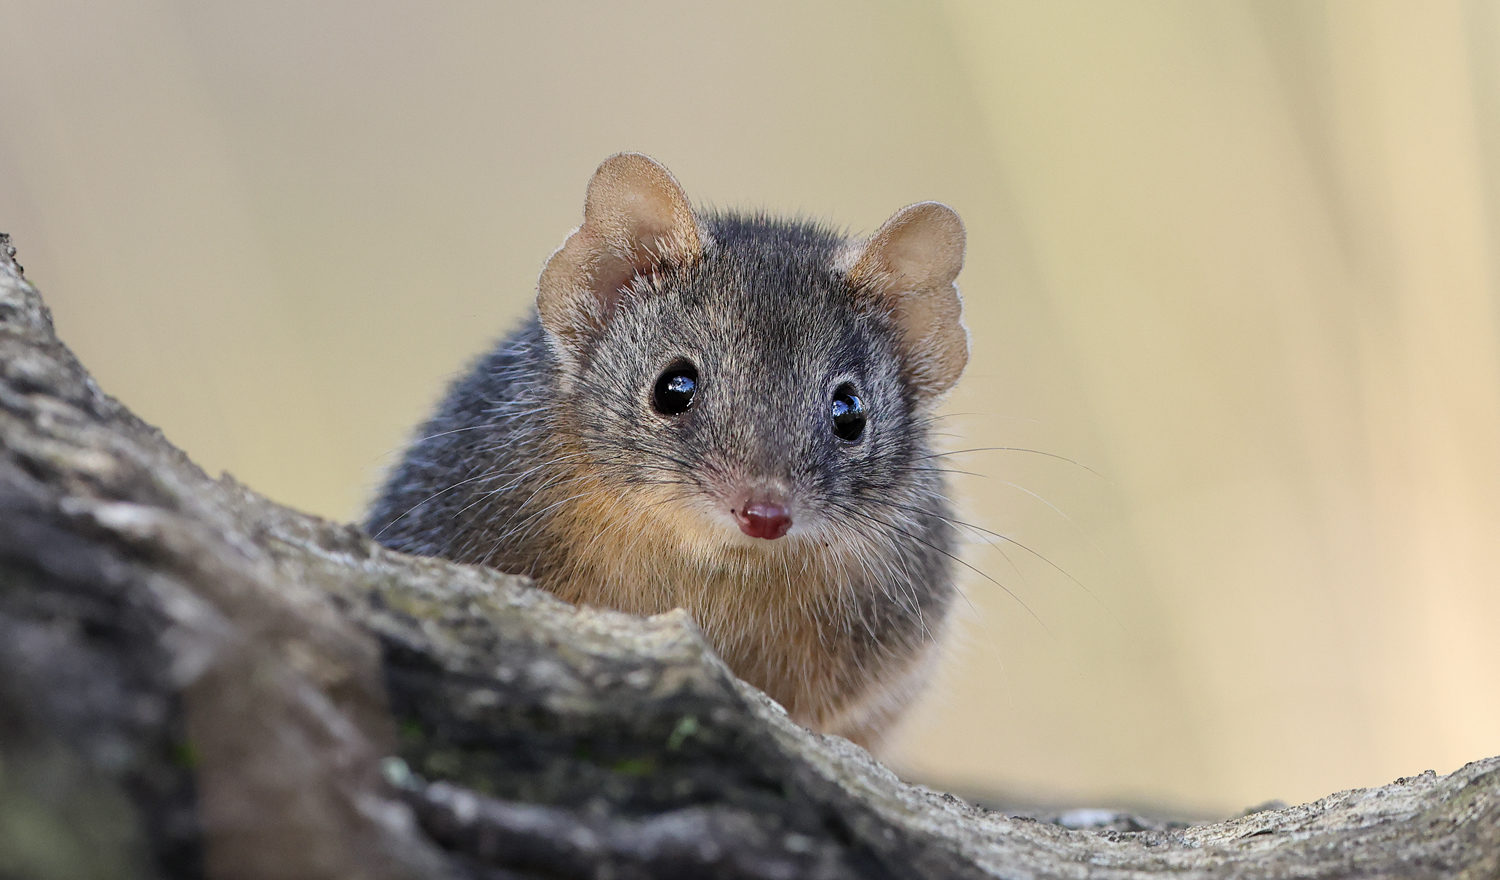 small mouse-like marsupial looks at the camera